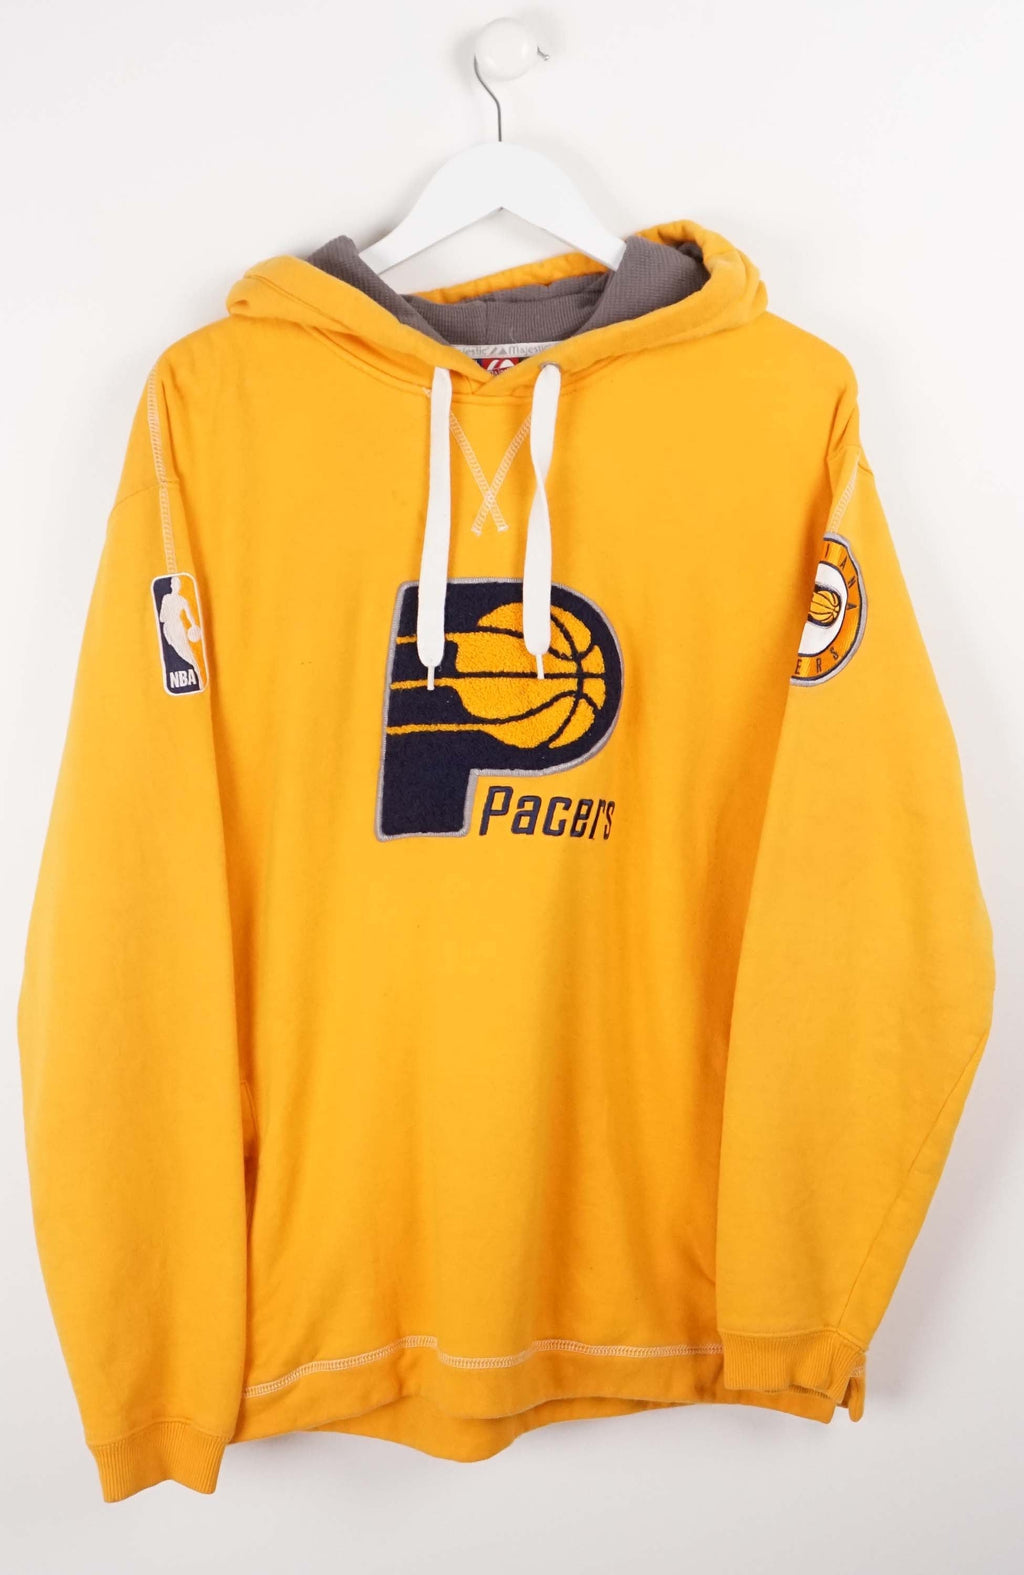 VINTAGE INDIANA PACERS SWEATER (L)